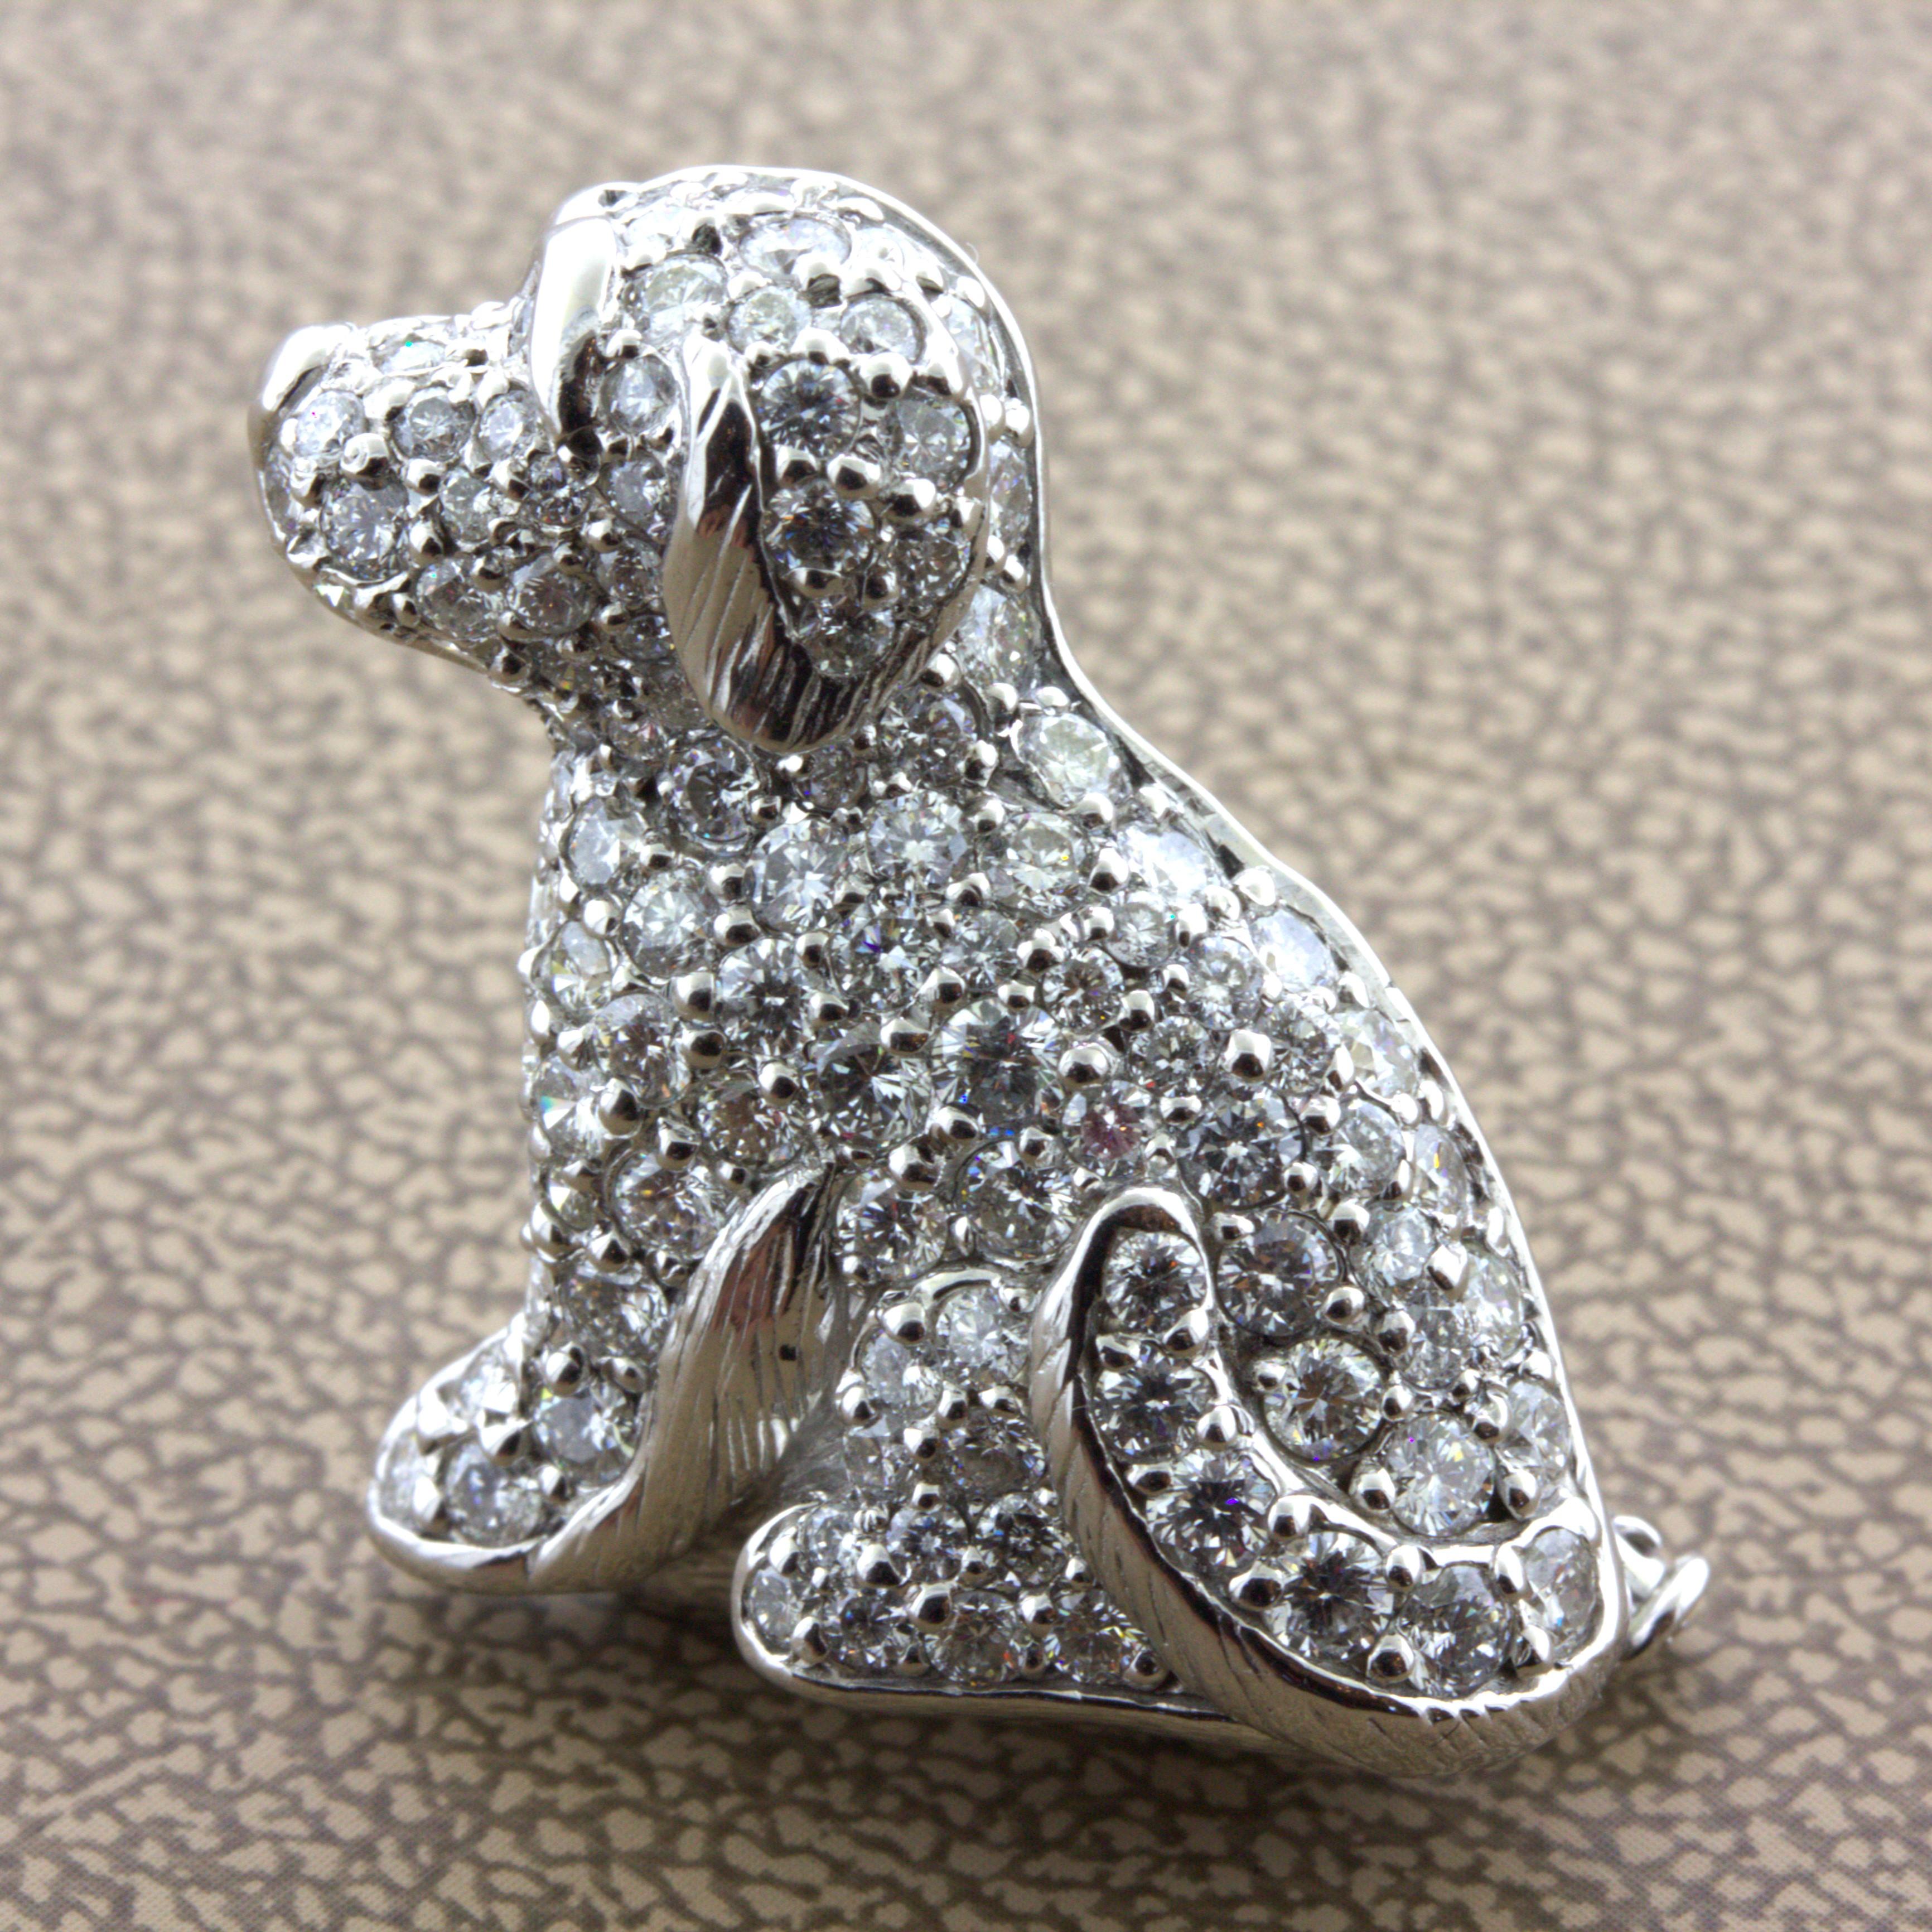 A sweet and adorable little puppy dog studded in diamonds! The piece features 2.47 carats of round brilliant-cut diamonds which are set across the entirety of the piece. The dog’s ears, tail, and legs are all detailed by hand-etched work for added